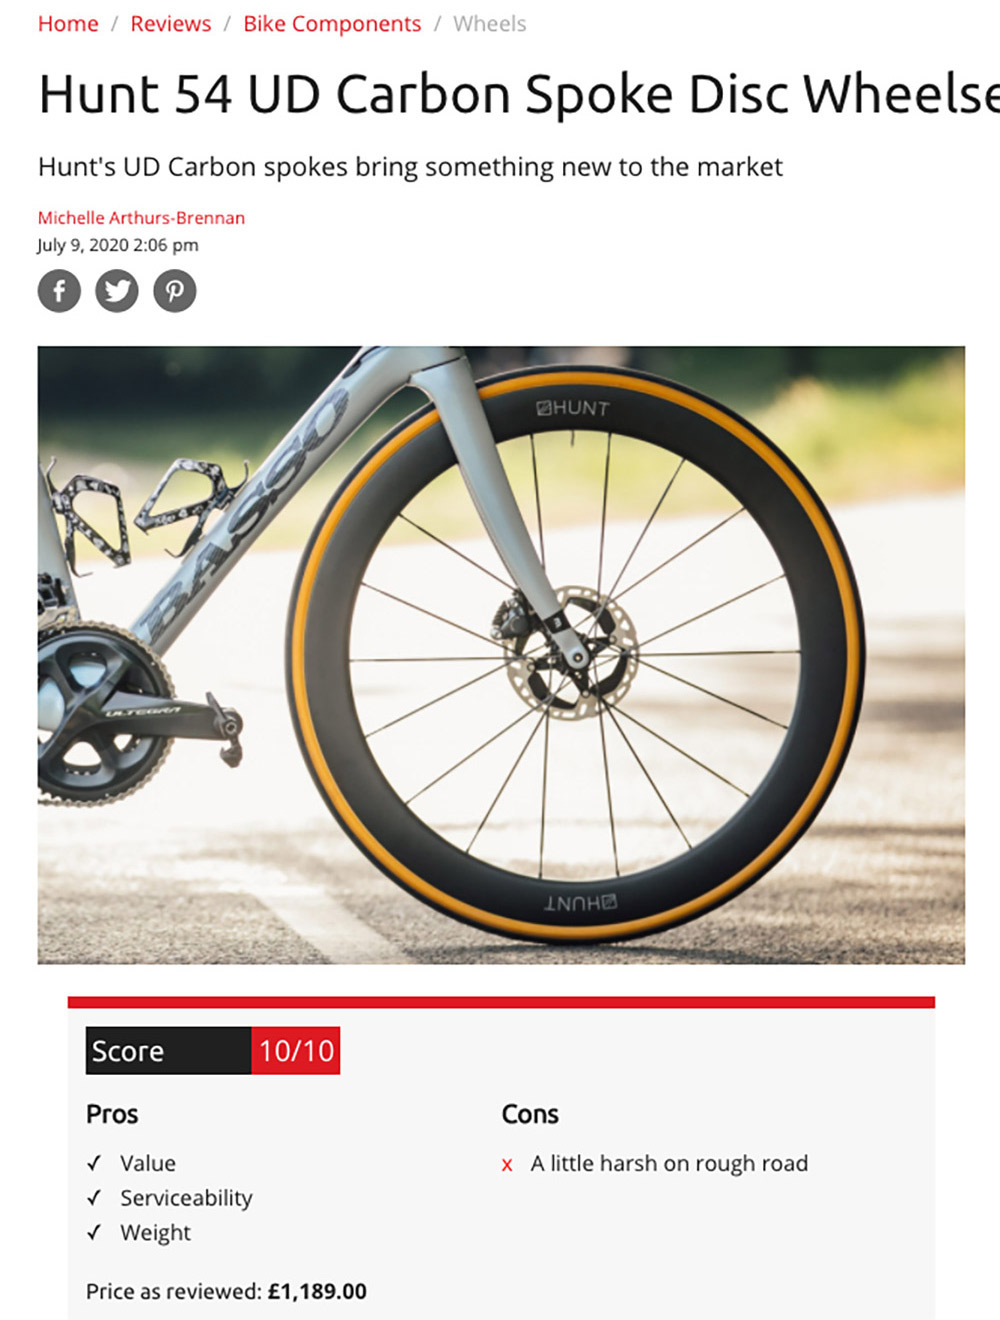 Cycling Weekly Review - HUNT 54 UD Carbon Spoke Disc Wheelset